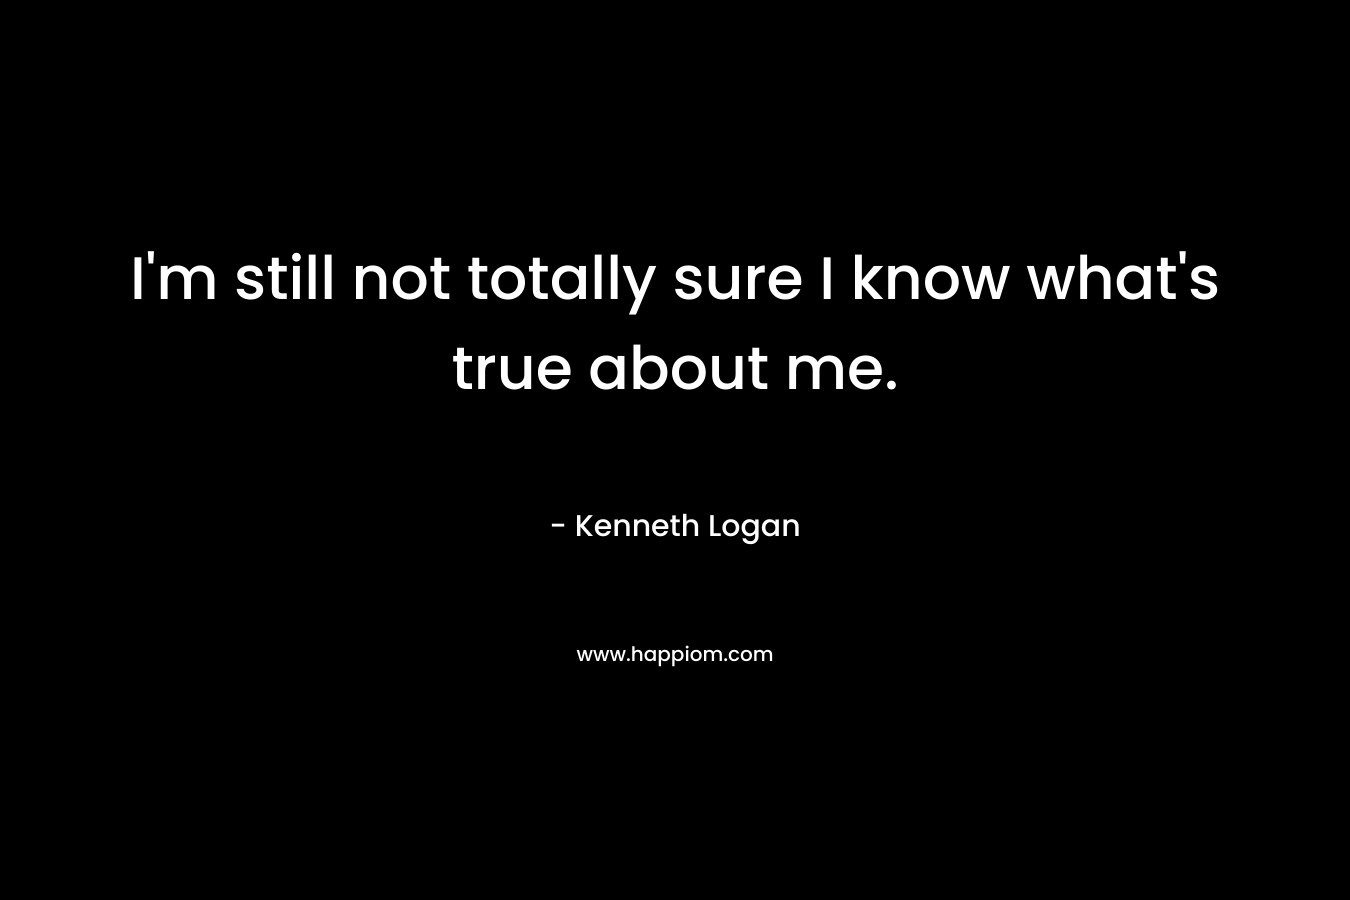 I’m still not totally sure I know what’s true about me. – Kenneth Logan